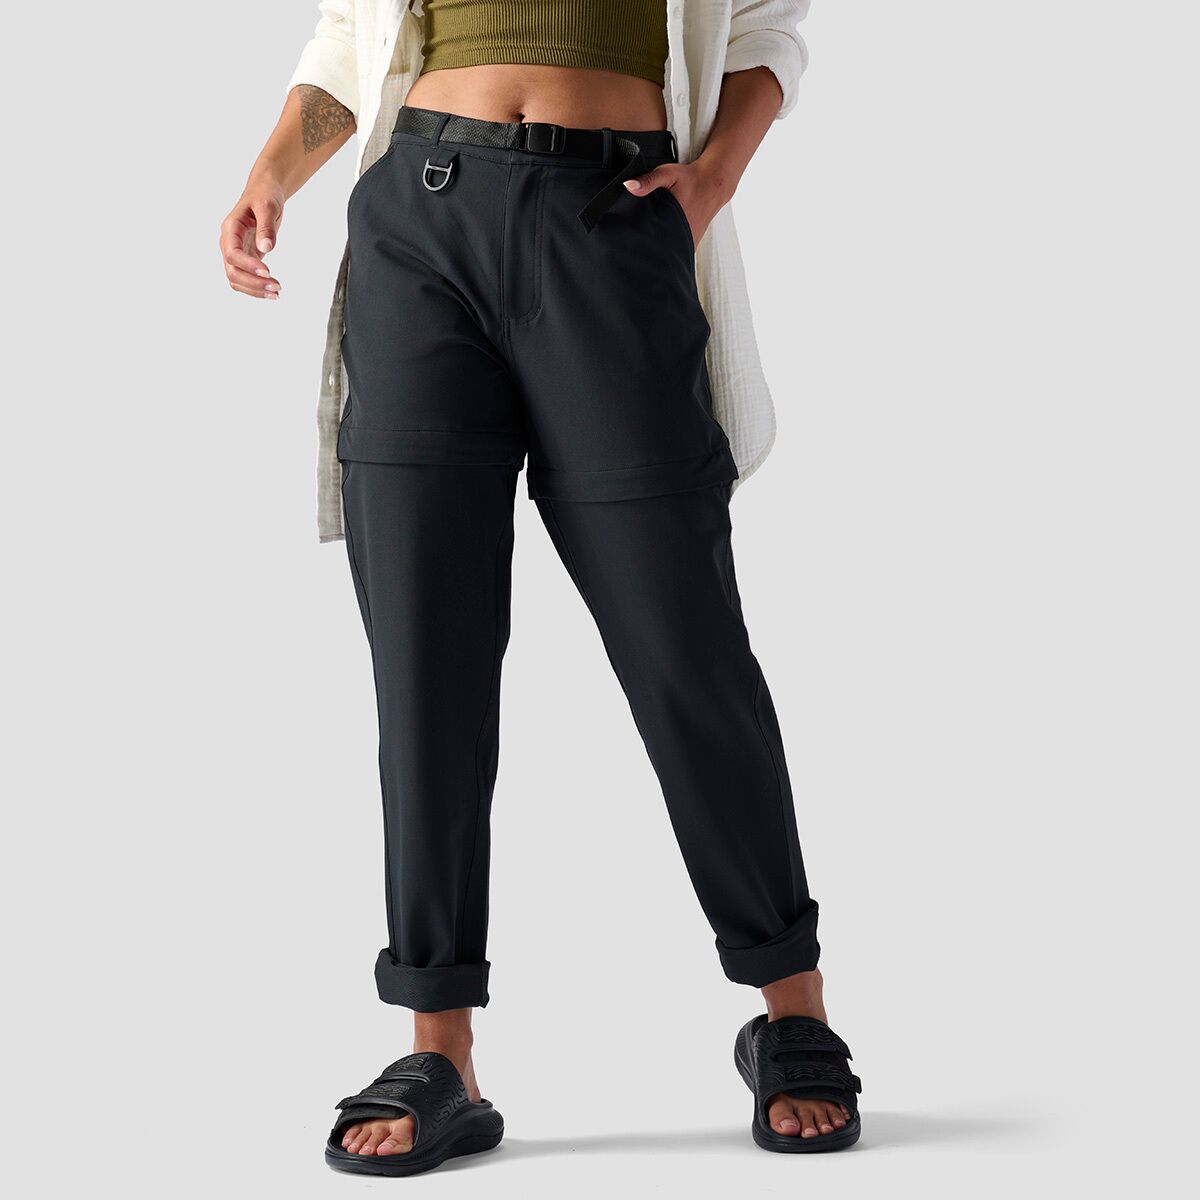 11 Best Convertible Pants You Can Zip On and Off in 2023 | Well+Good